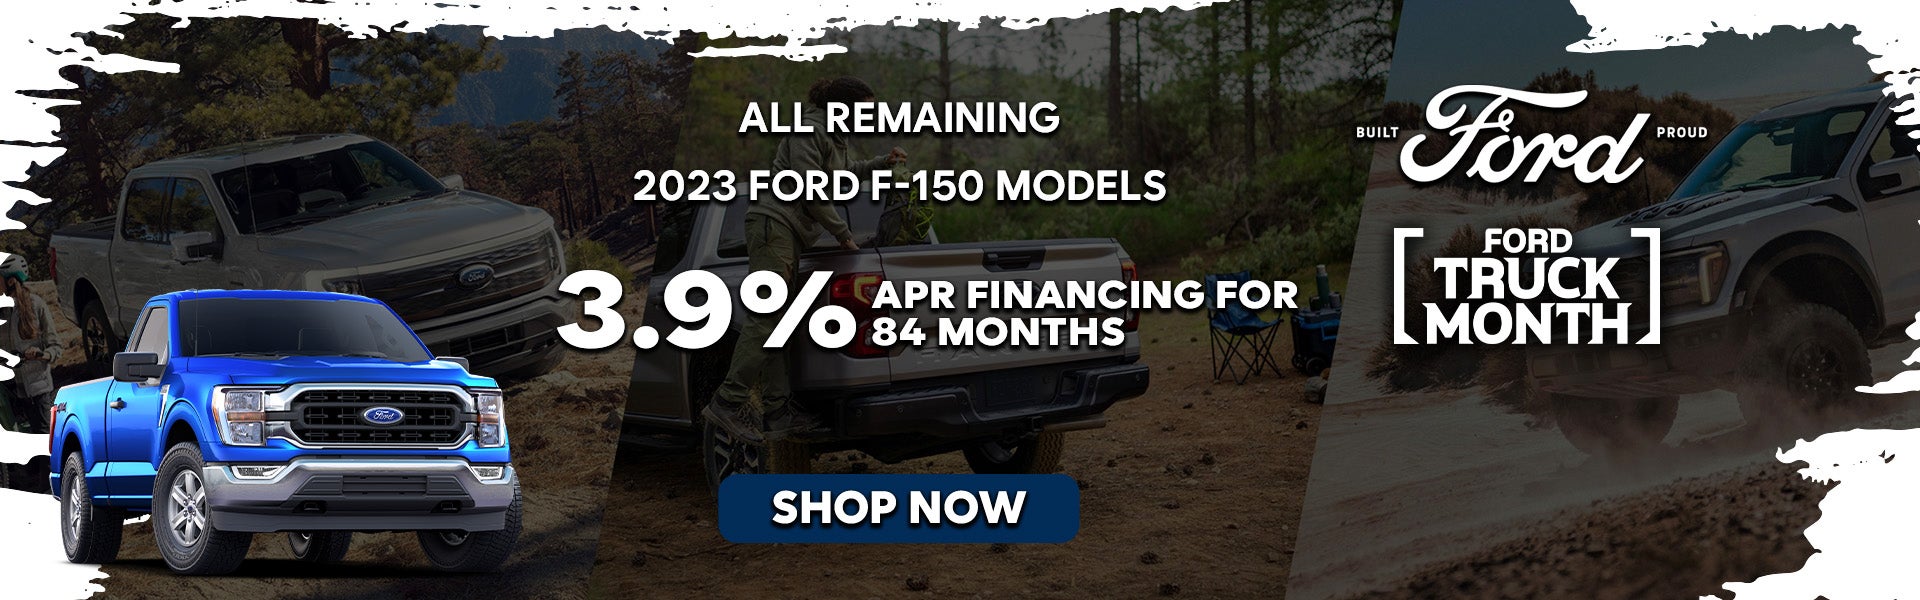 Save on New 2023 Ford F-150